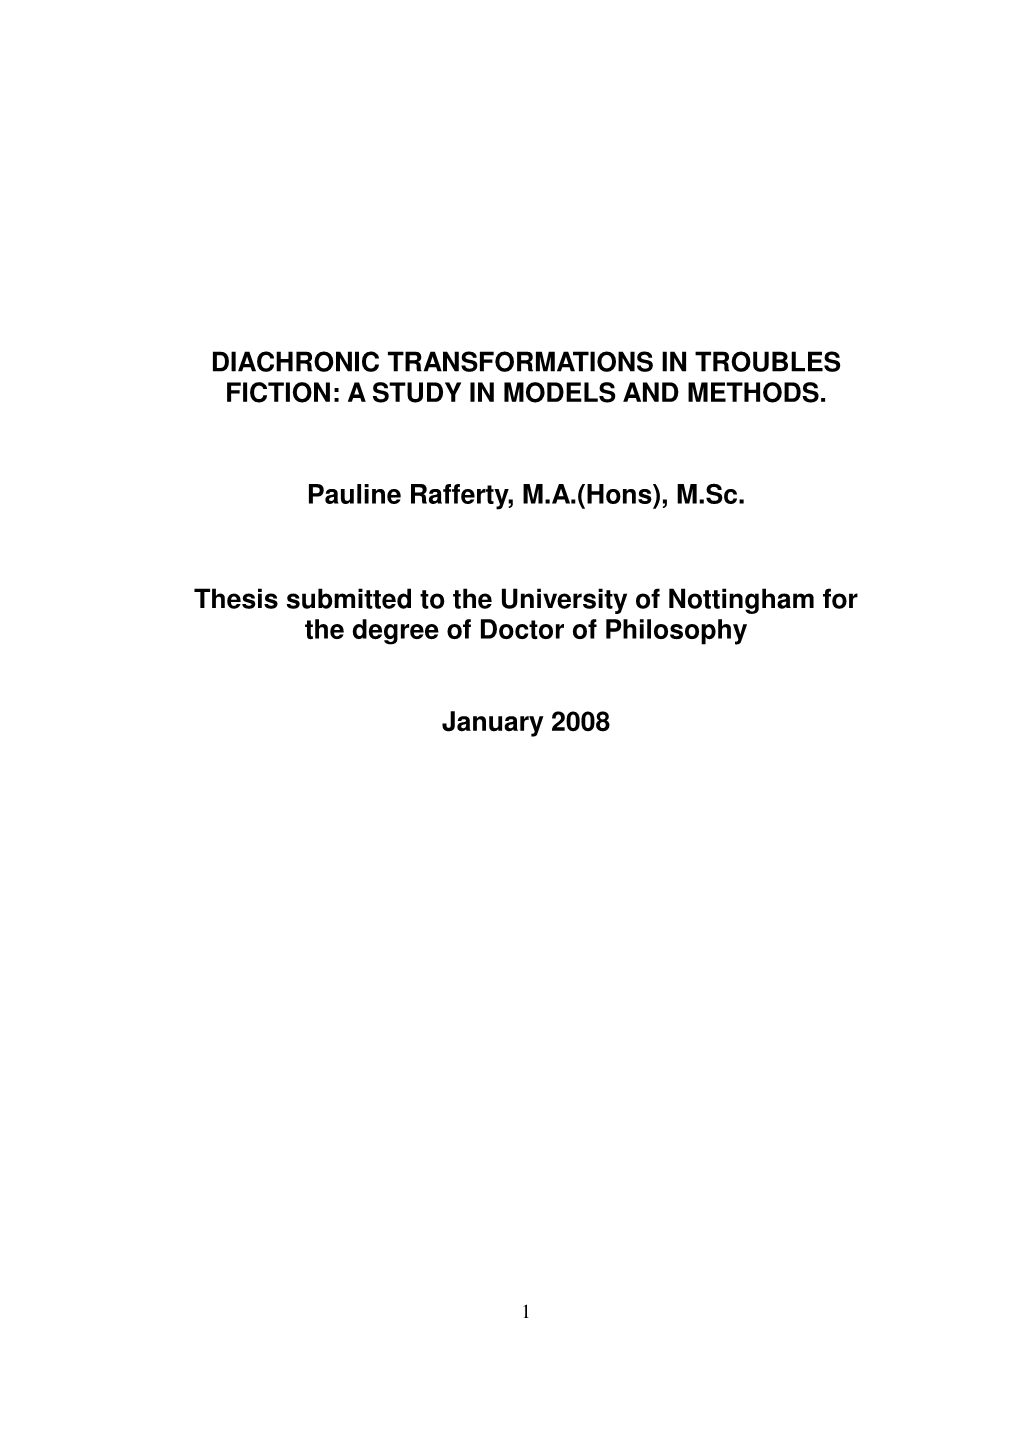 Diachronic Transformations in Troubles Fiction: a Study in Models and Methods